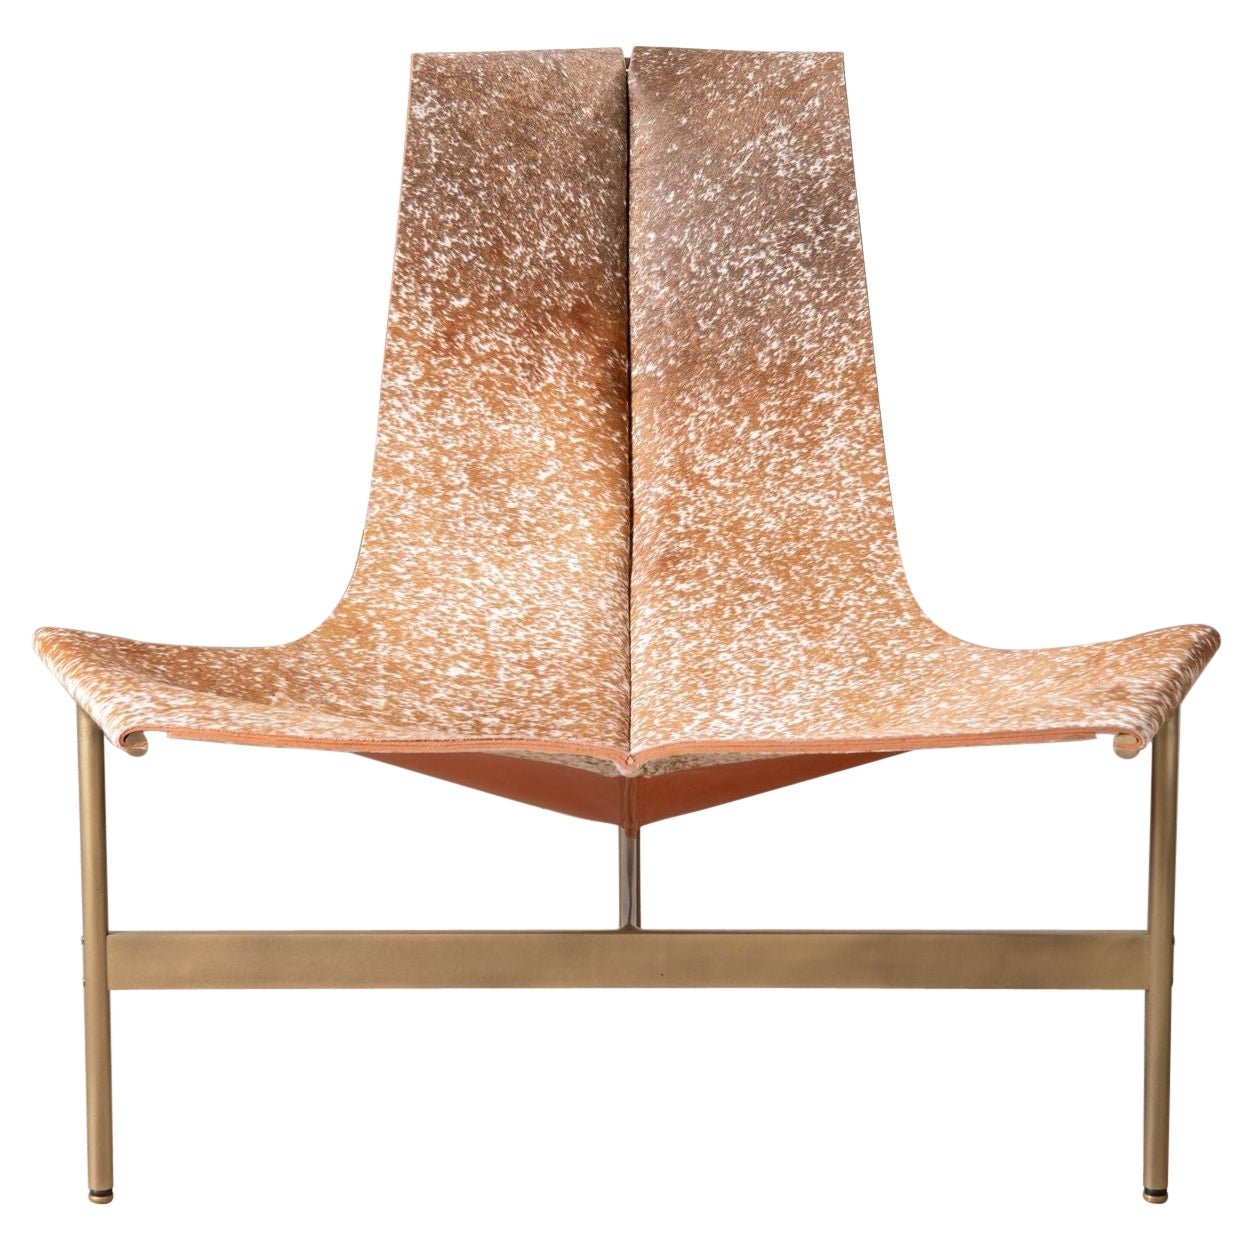 'TH-15' Sling Lounge Chair in bronze & hair on hide by Katavolos Littell & Kelly For Sale